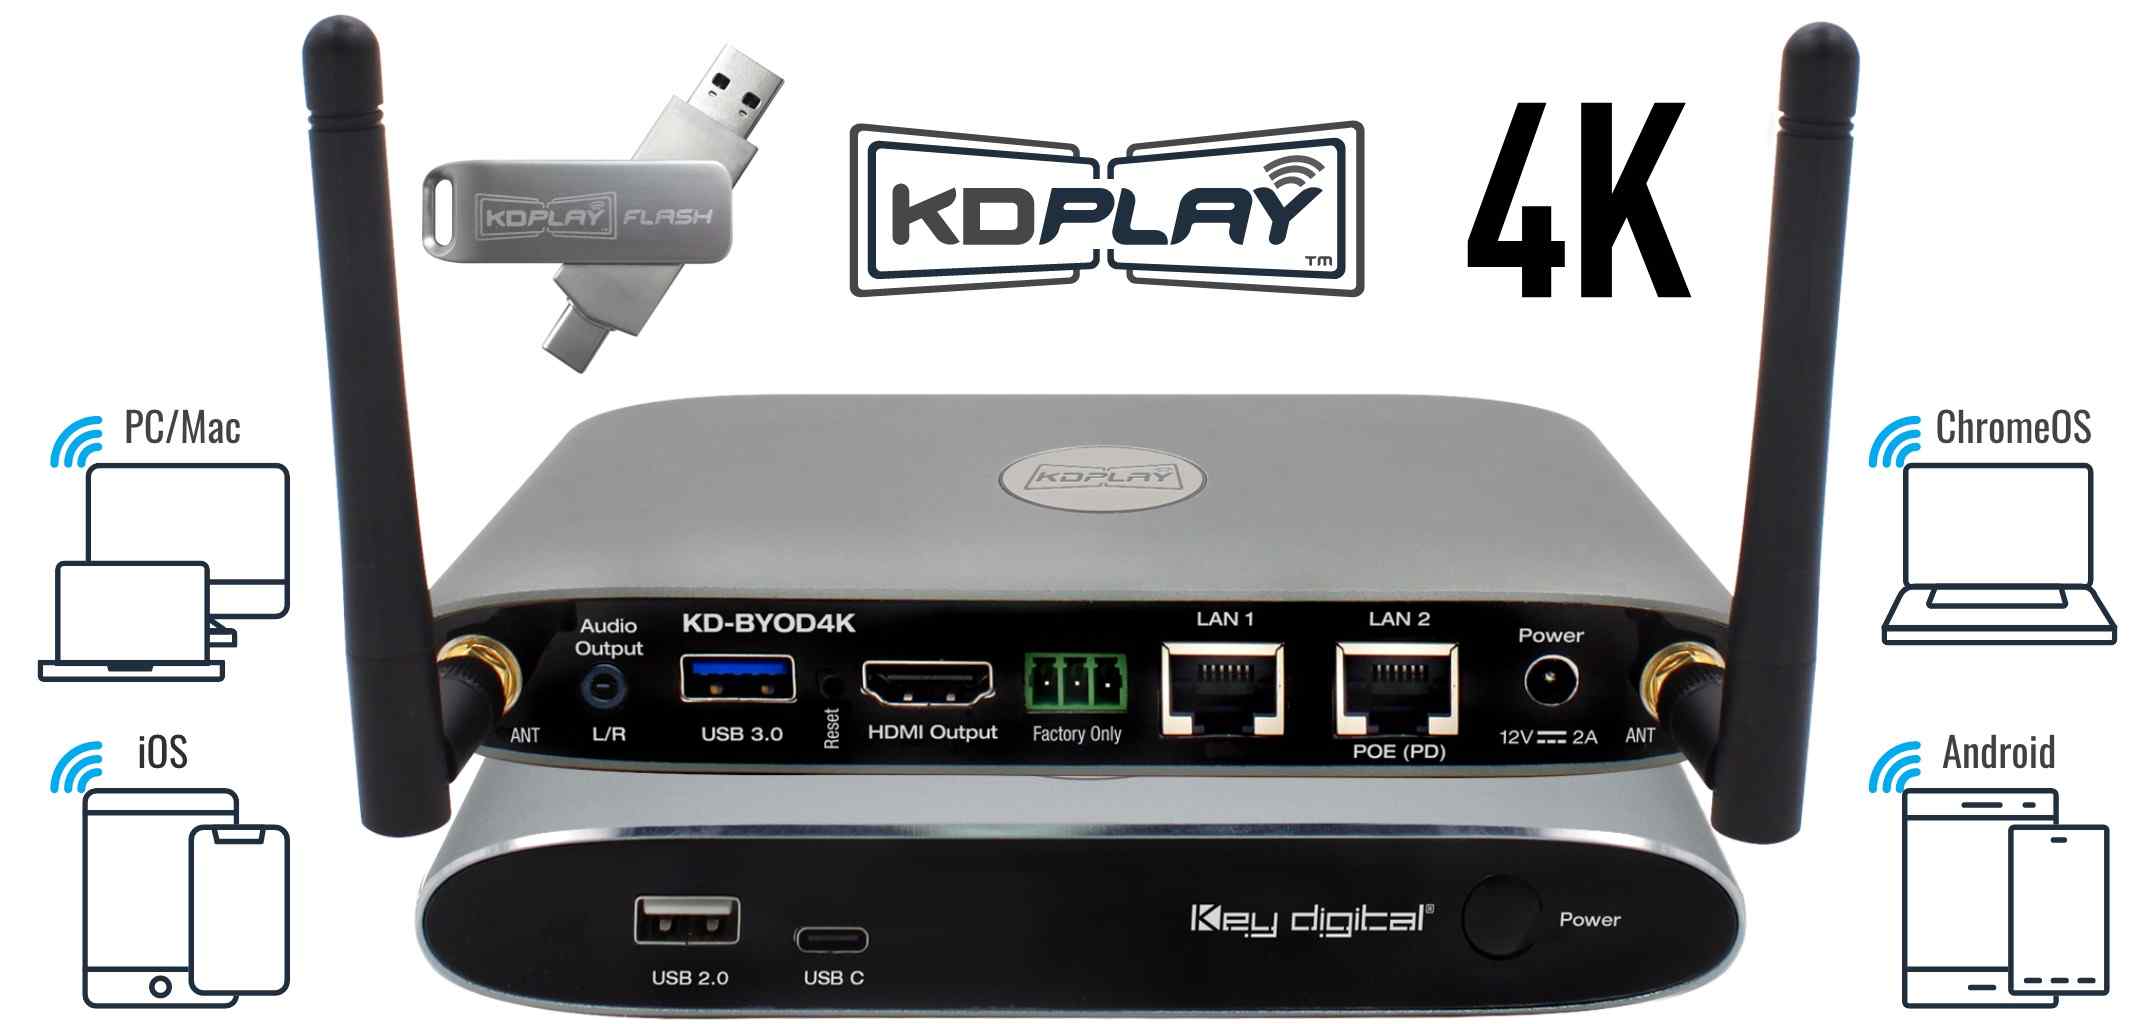 KD-BYOD4K Wireless Presentation Gateway- A high-performance solution for seamless wireless presentations and user-friendly functionality.